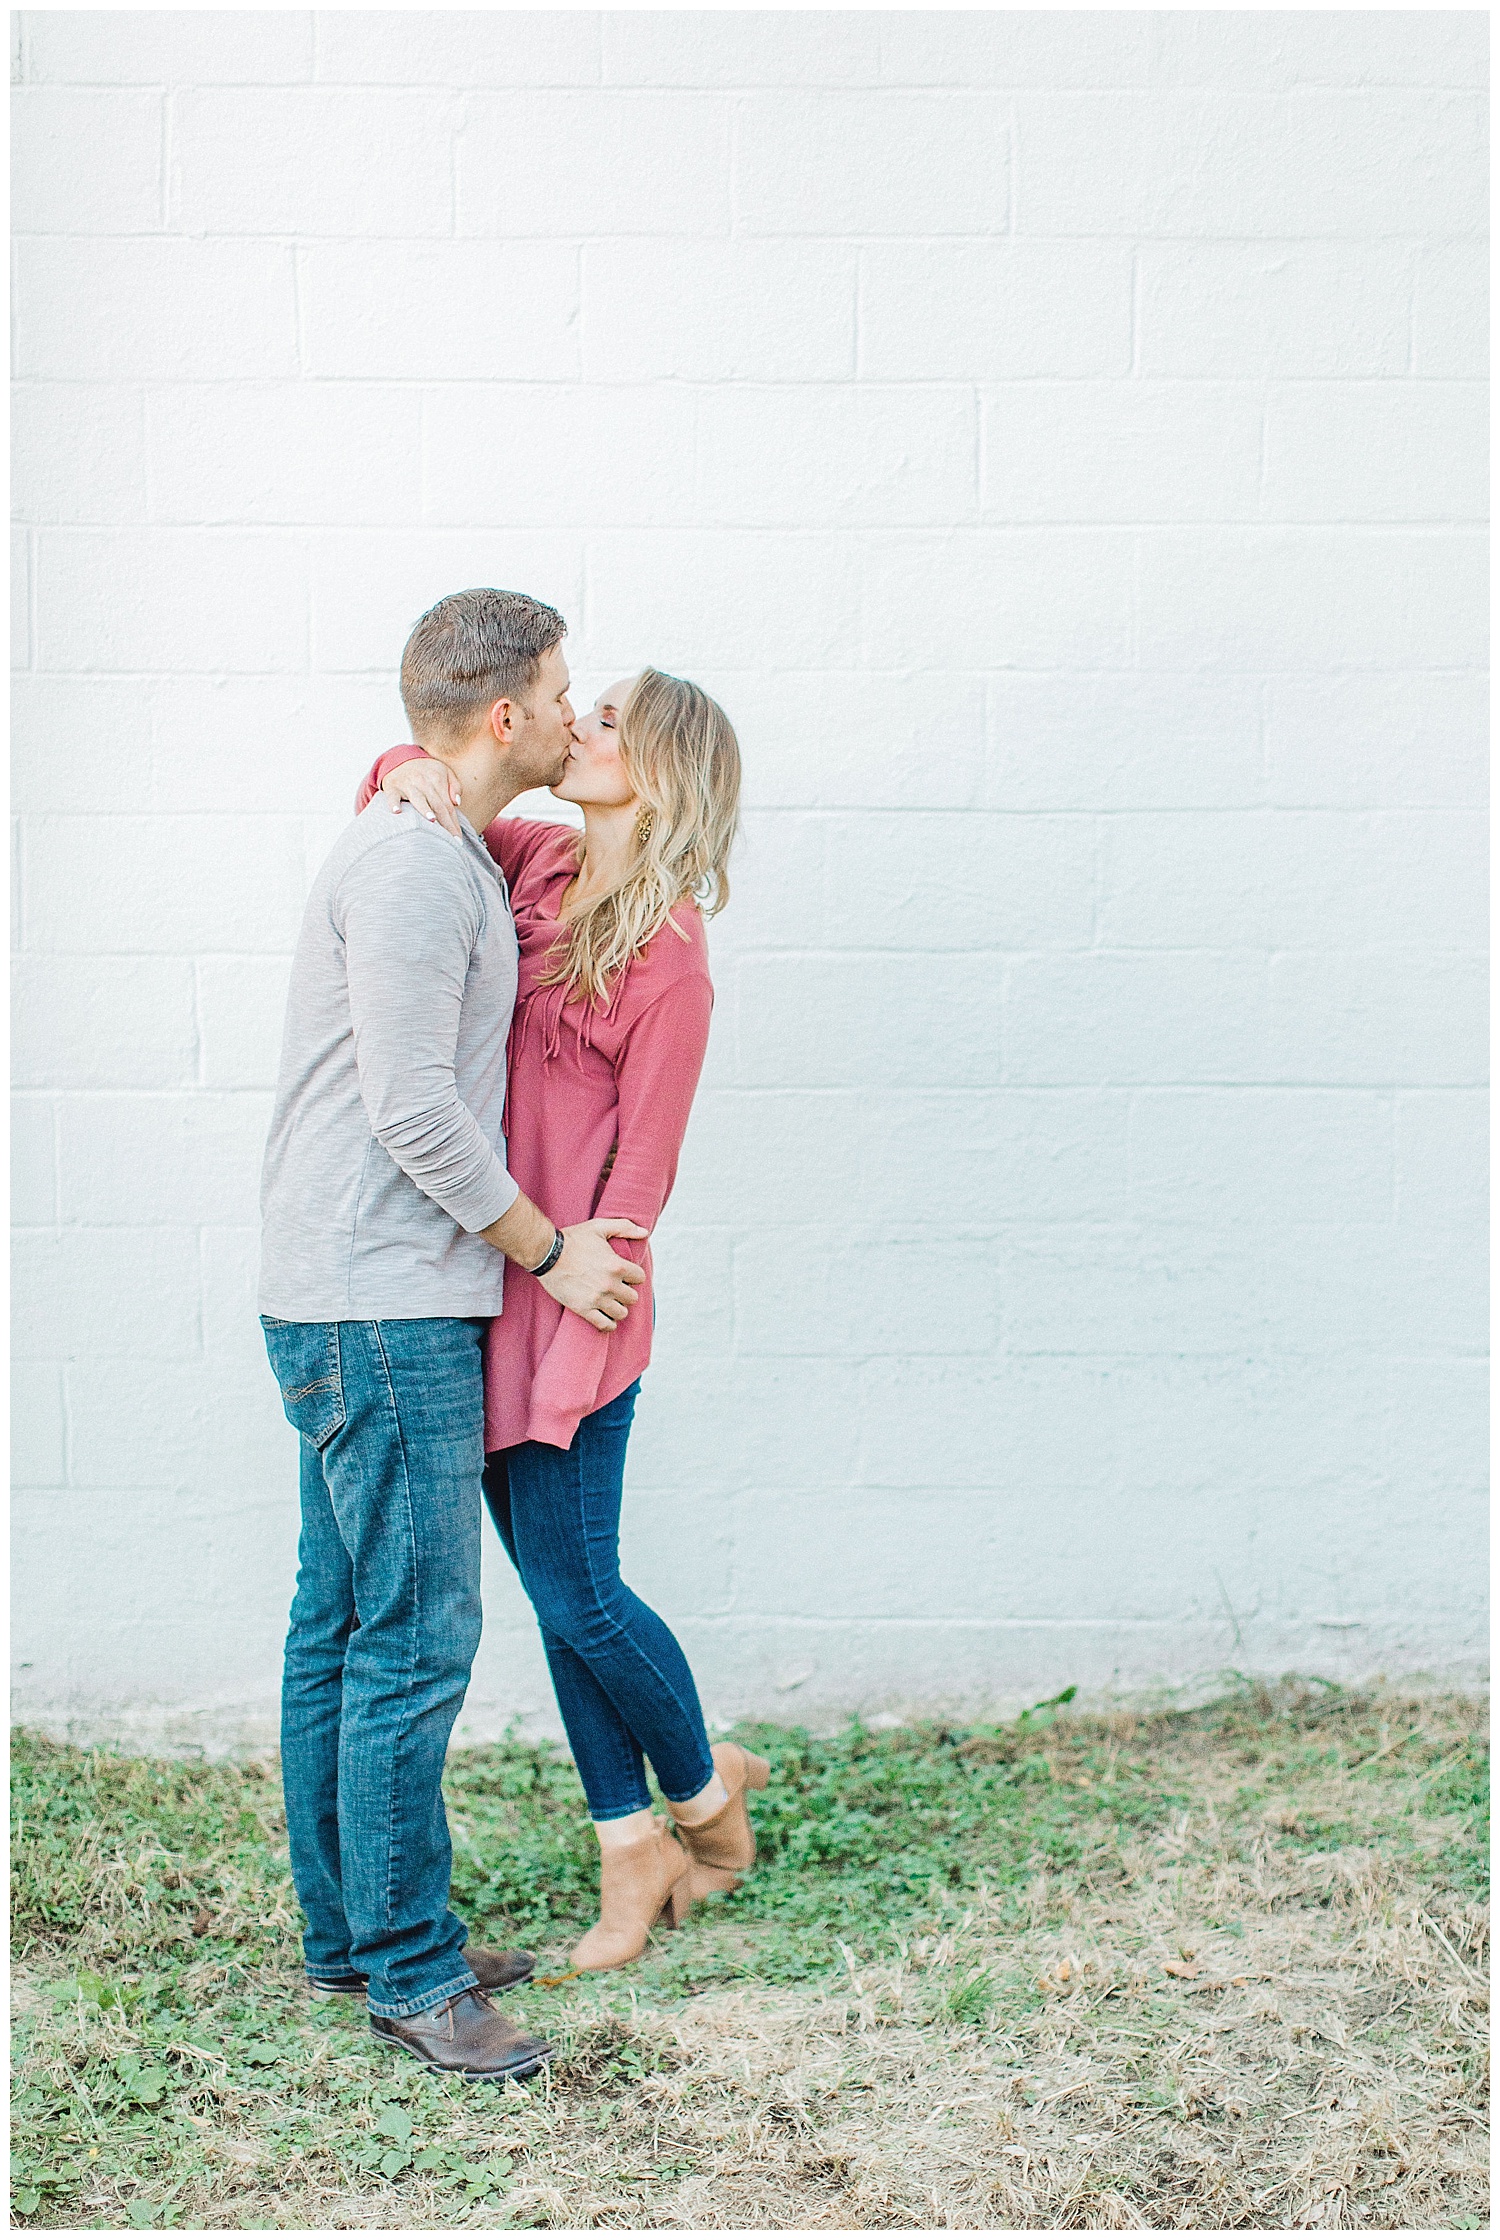 ERC_1042_Downtown Nashville Engagement Session at Barista Parlor | Emma Rose Company Wedding Photographer | Outfit Inspiration for Engagement Session | Kindred Light and Airy Photographer.jpg